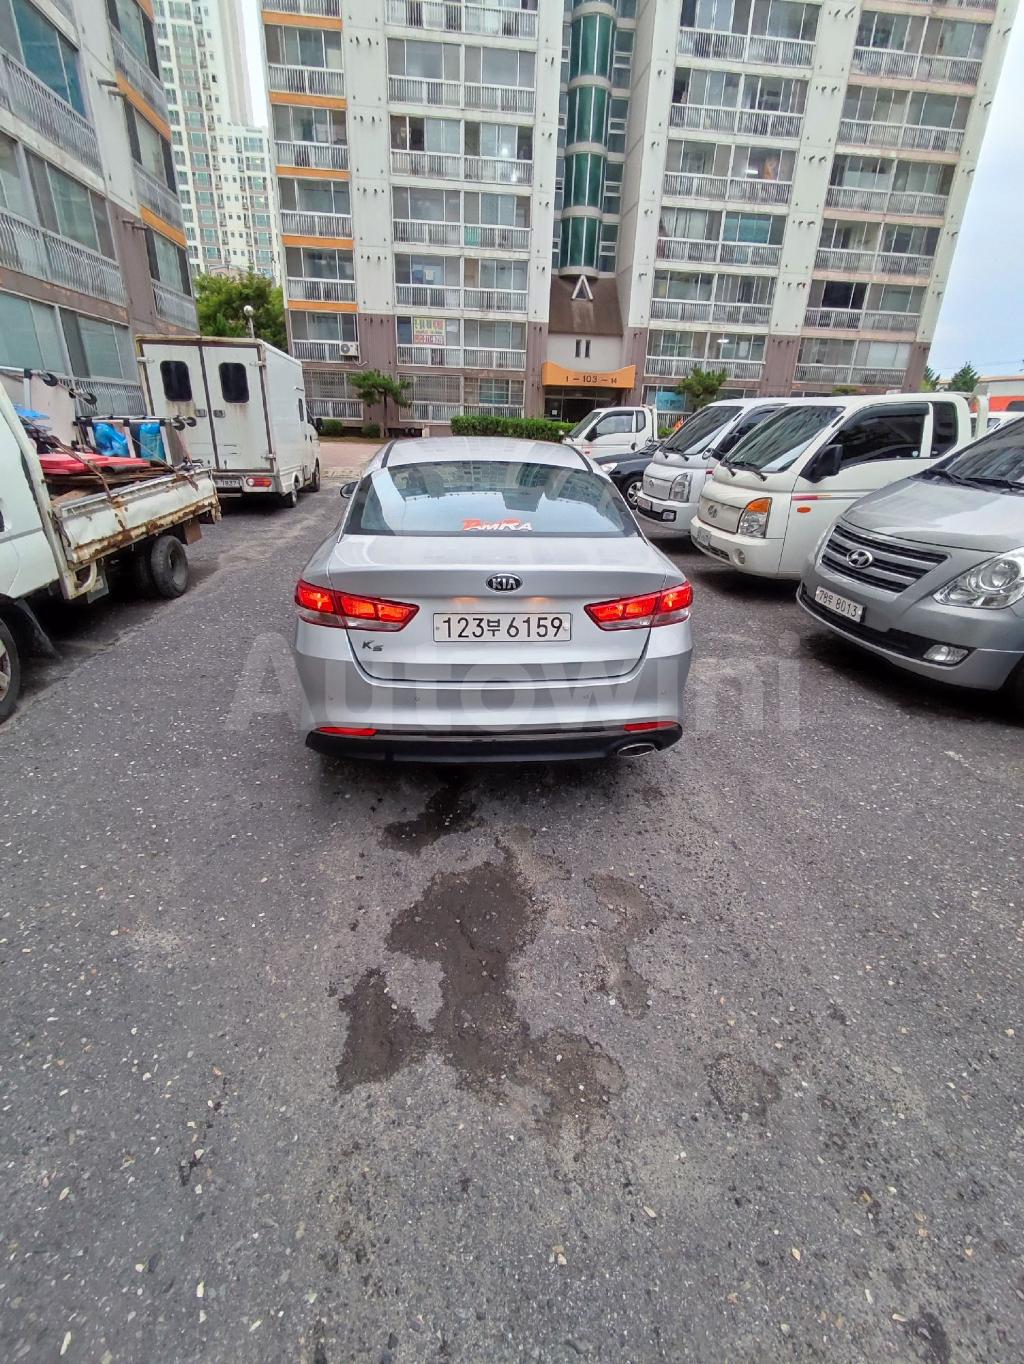 KNAGS416BGA004616   ?RE-CARVED VIN NUMBER  BUYERS NEED TO CHECK IF RE-CARVED VIN NUMBERS ARE ALLOWED IN THEIR COUNTRY TO AVOID CUSTOMS ISSUES BEFORE BOOKING. 2015 KIA K5 2ND GEN OPTIMA 력셔리-1